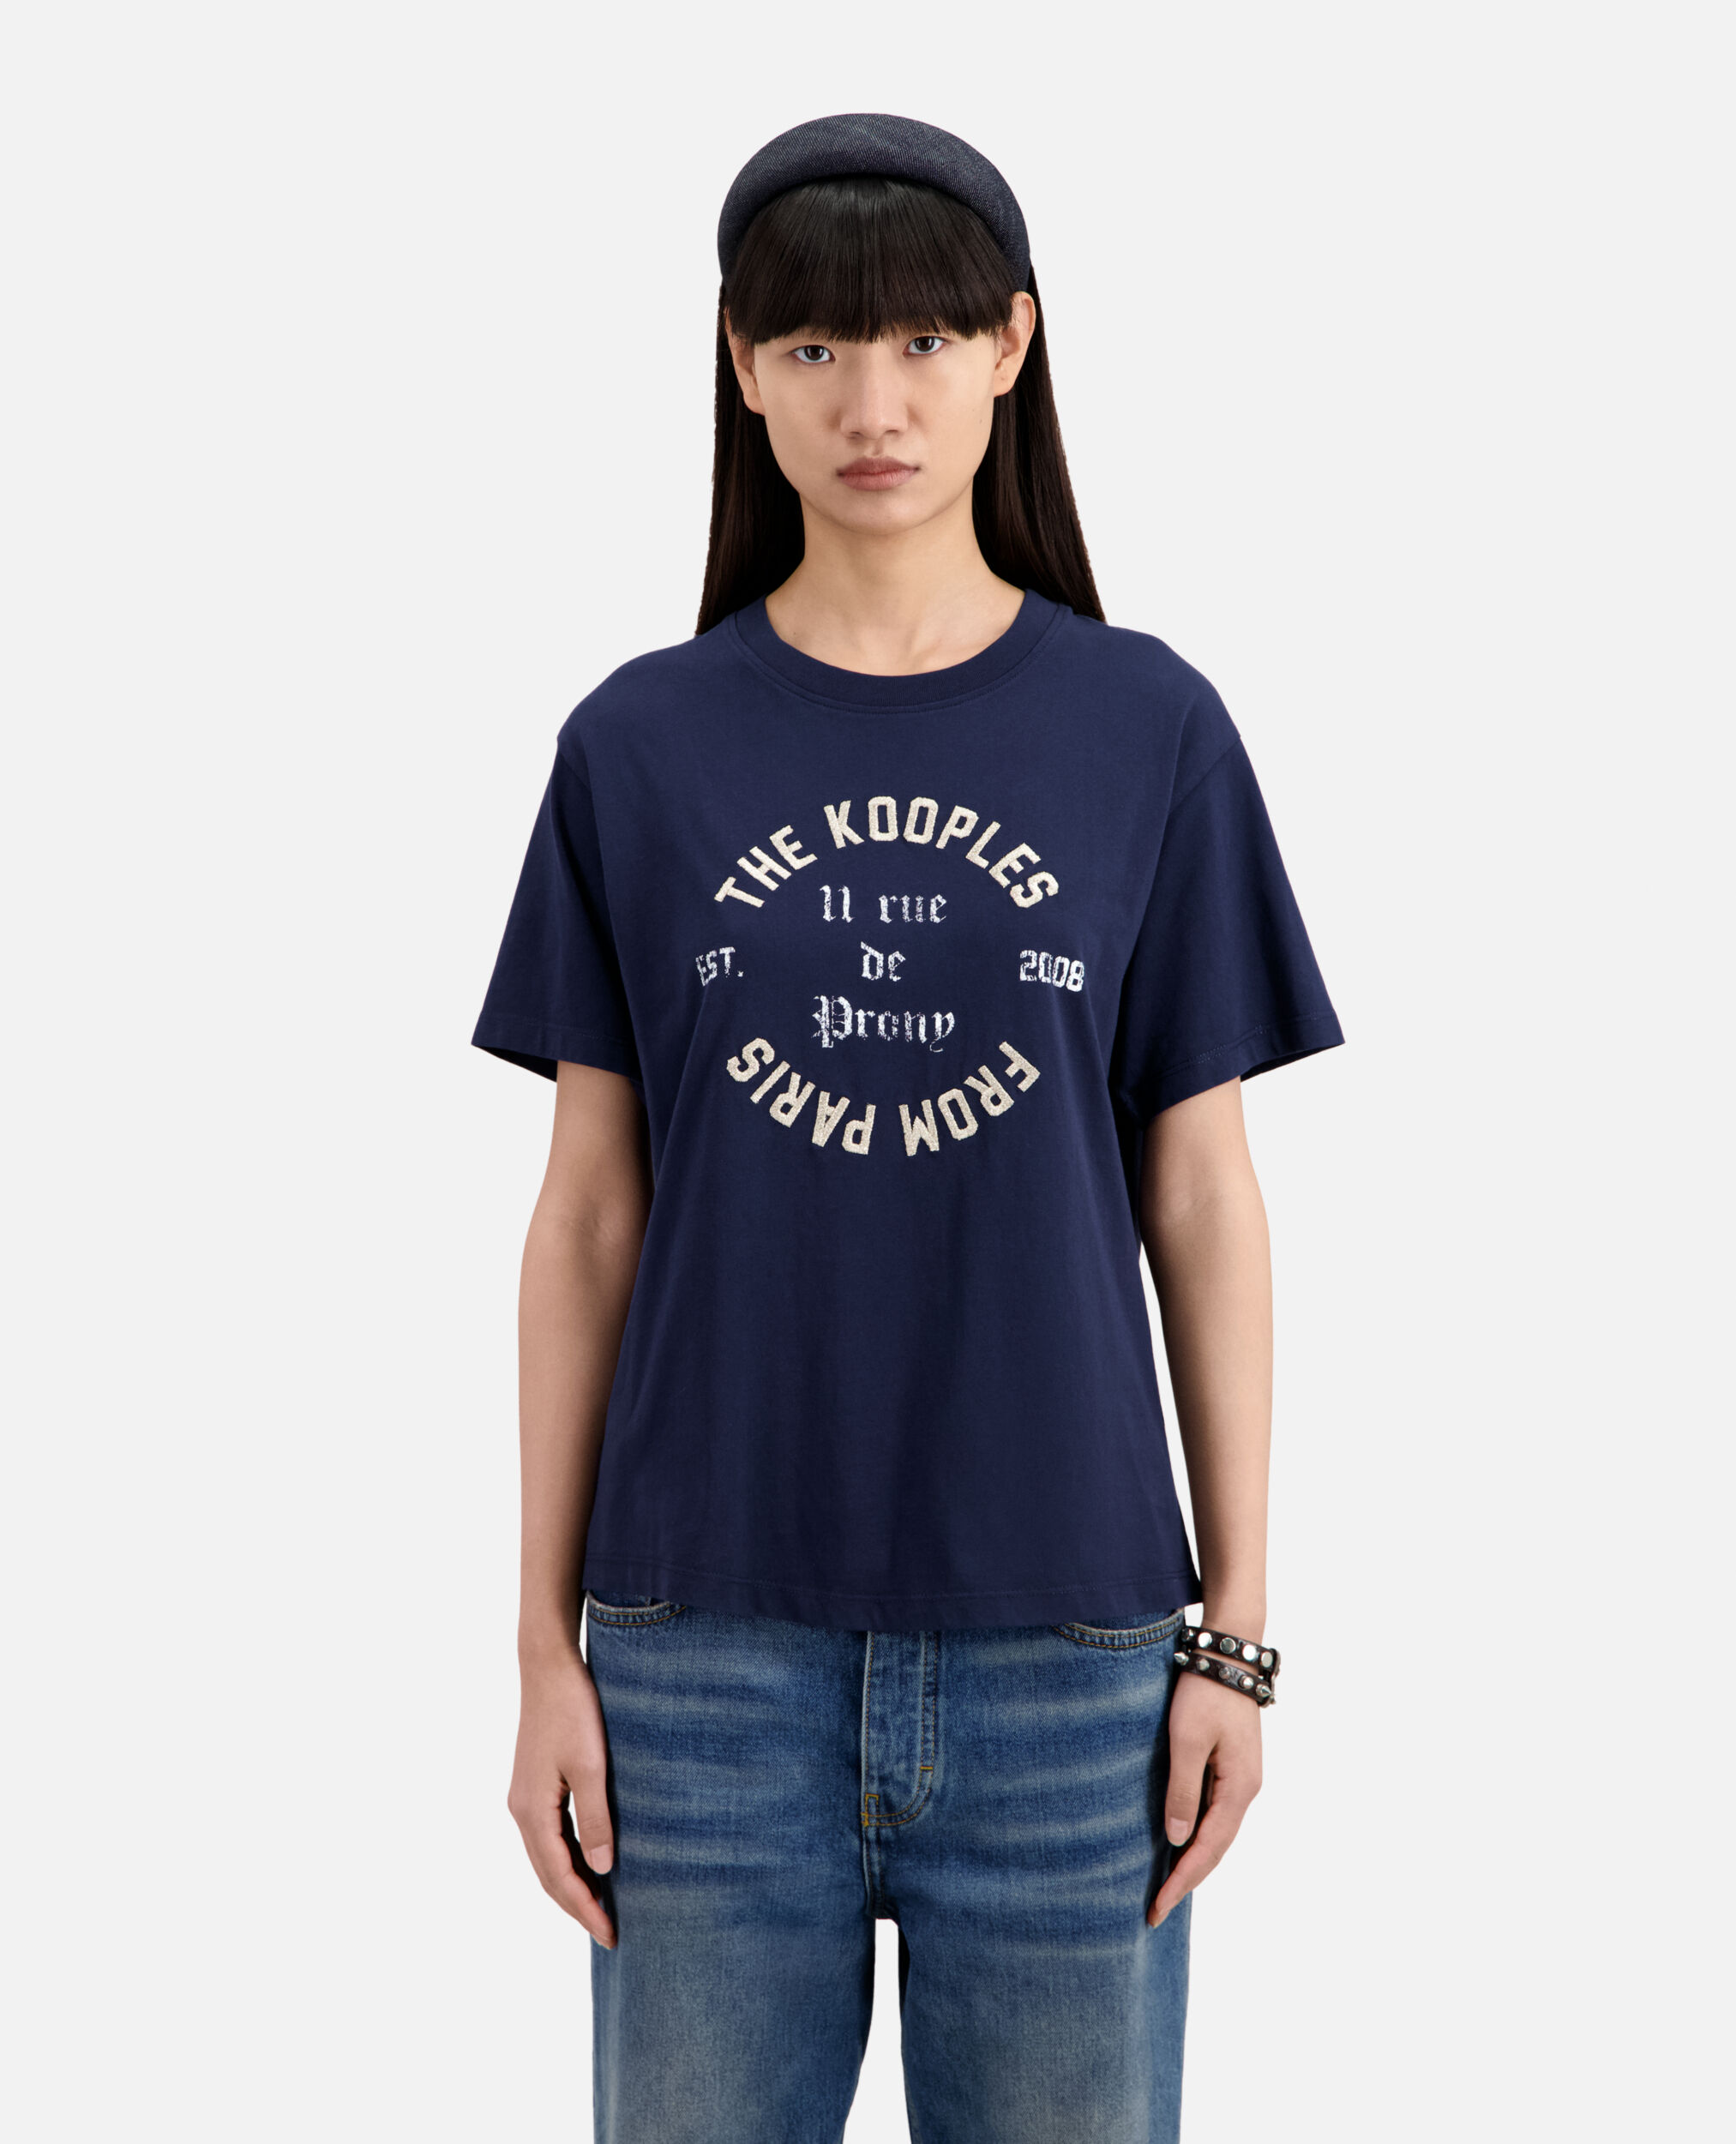 Women's navy blue t-shirt with 11 rue de prony serigraphy, NAVY, hi-res image number null